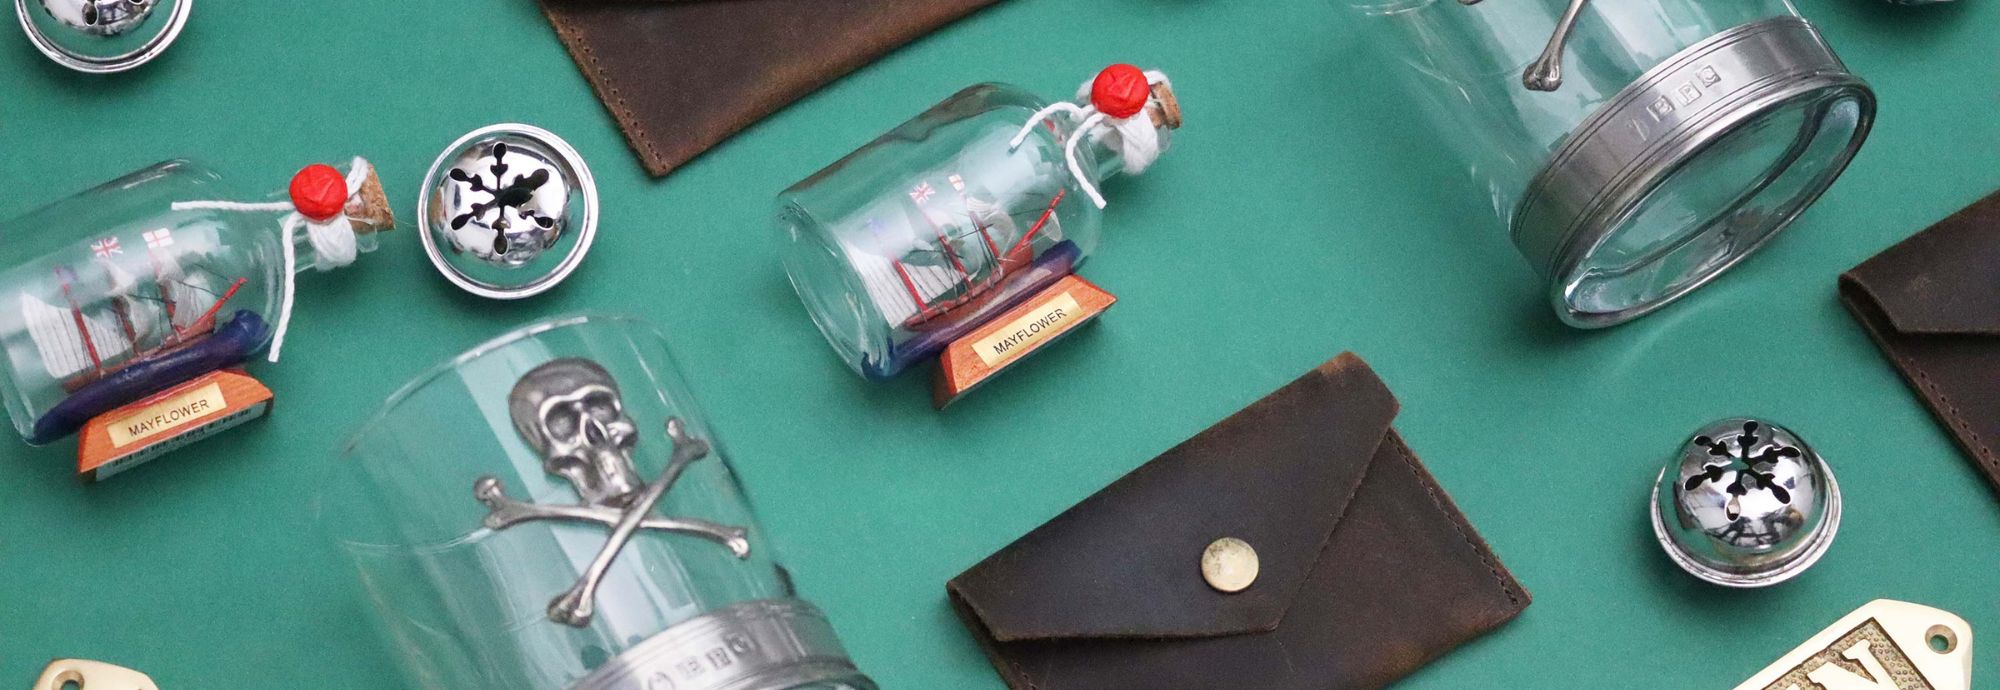 A collection of maritime-themed Christmas gifts arranged on a green table. The gifts include a skull and crossbones whisky tumbler, a leather coin pouch, a brass bottle opener with the text 'Captain' on it, and a small ship in a bottle. There are also silver bauble decorations dotted about.